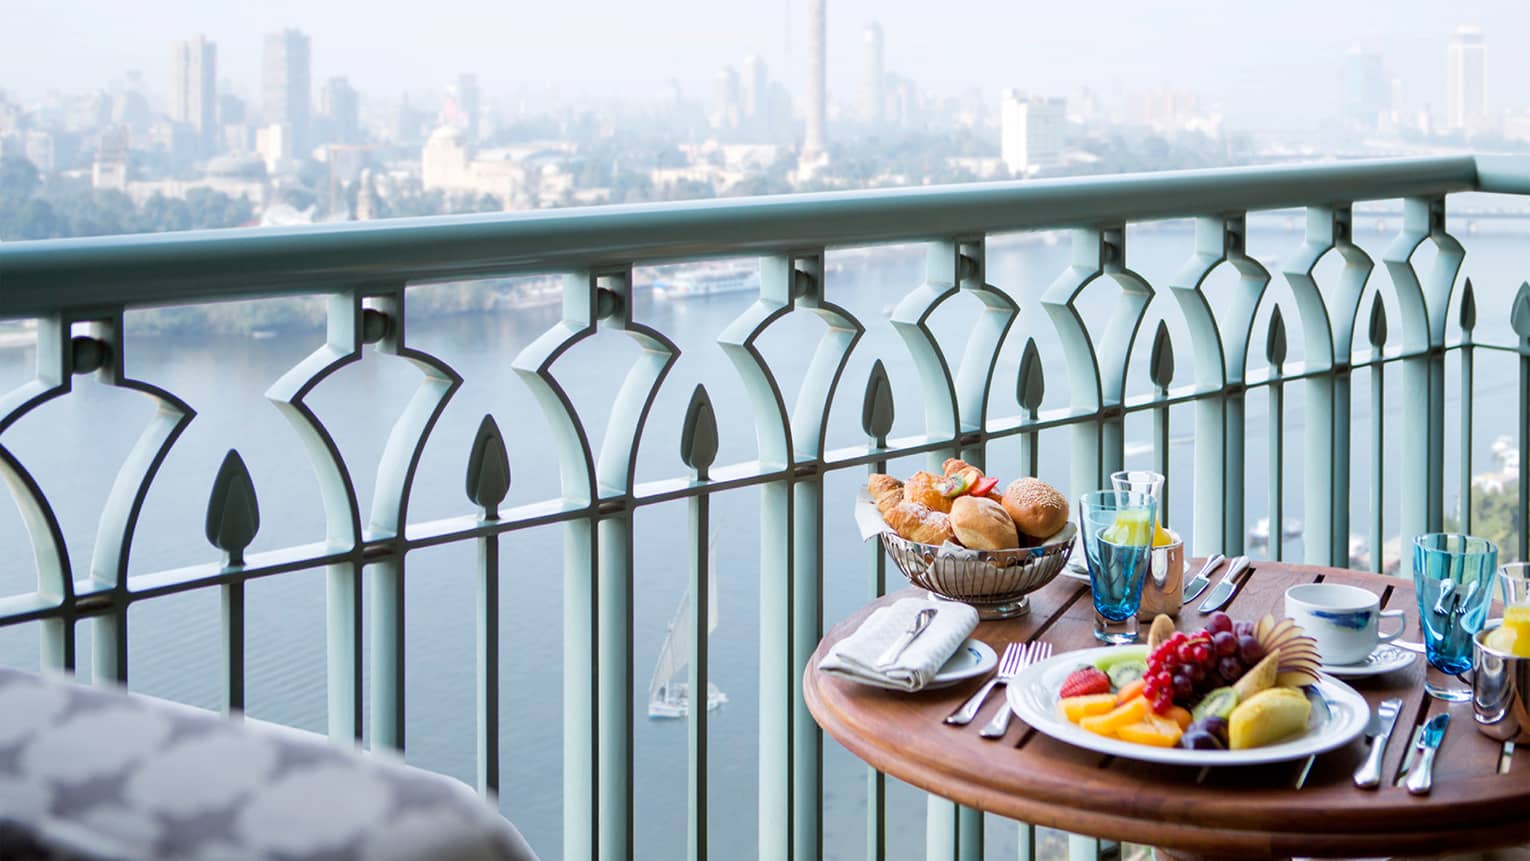 Close-up of balcony table with plate of fresh fruit, bread and orange juice, river and city view below